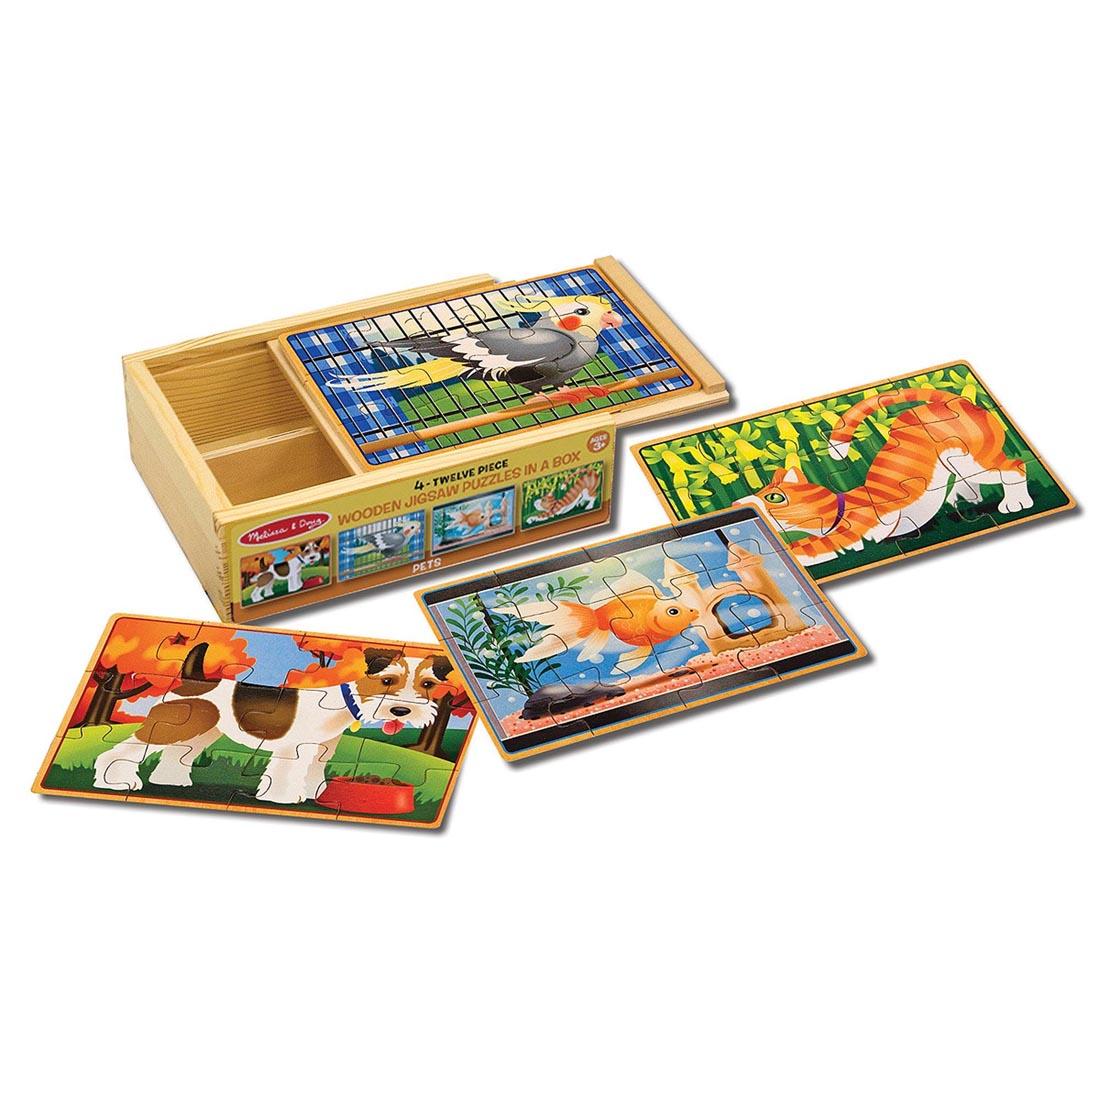 Pets Wooden Jigsaw Puzzles in a Box By Melissa & Doug